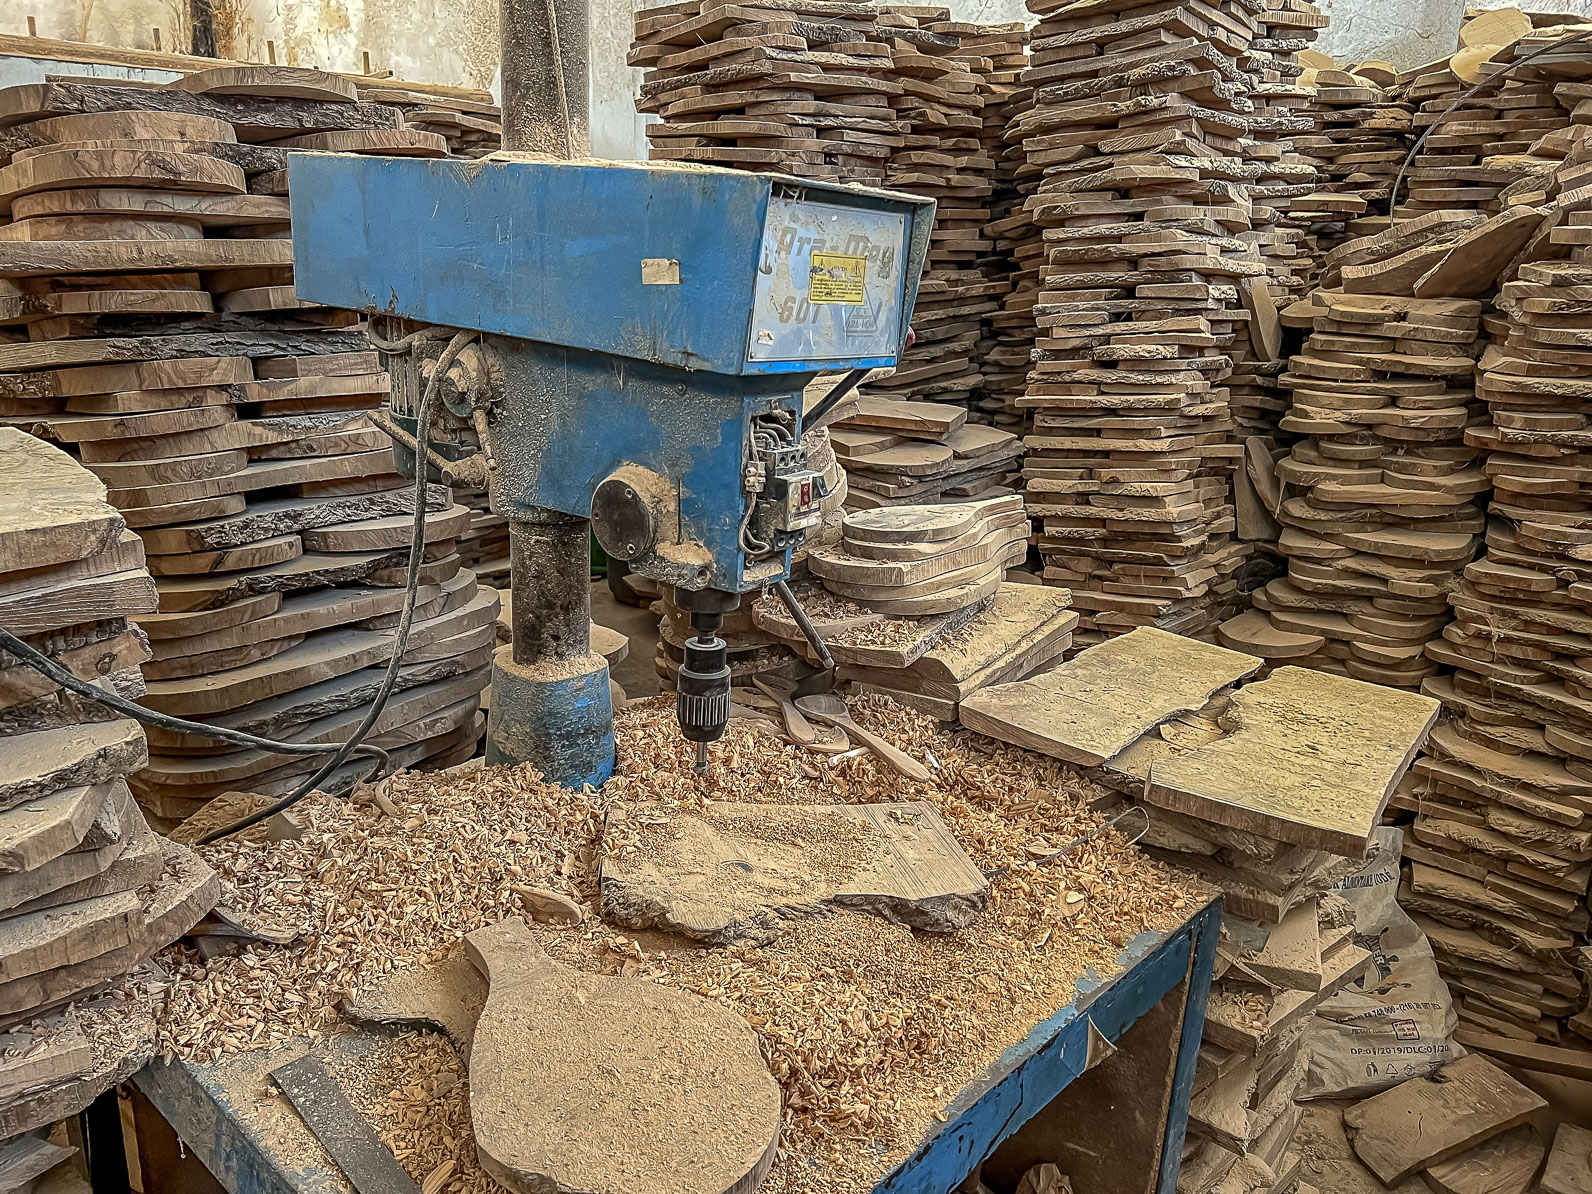 A machine in a room full of piles of wood.